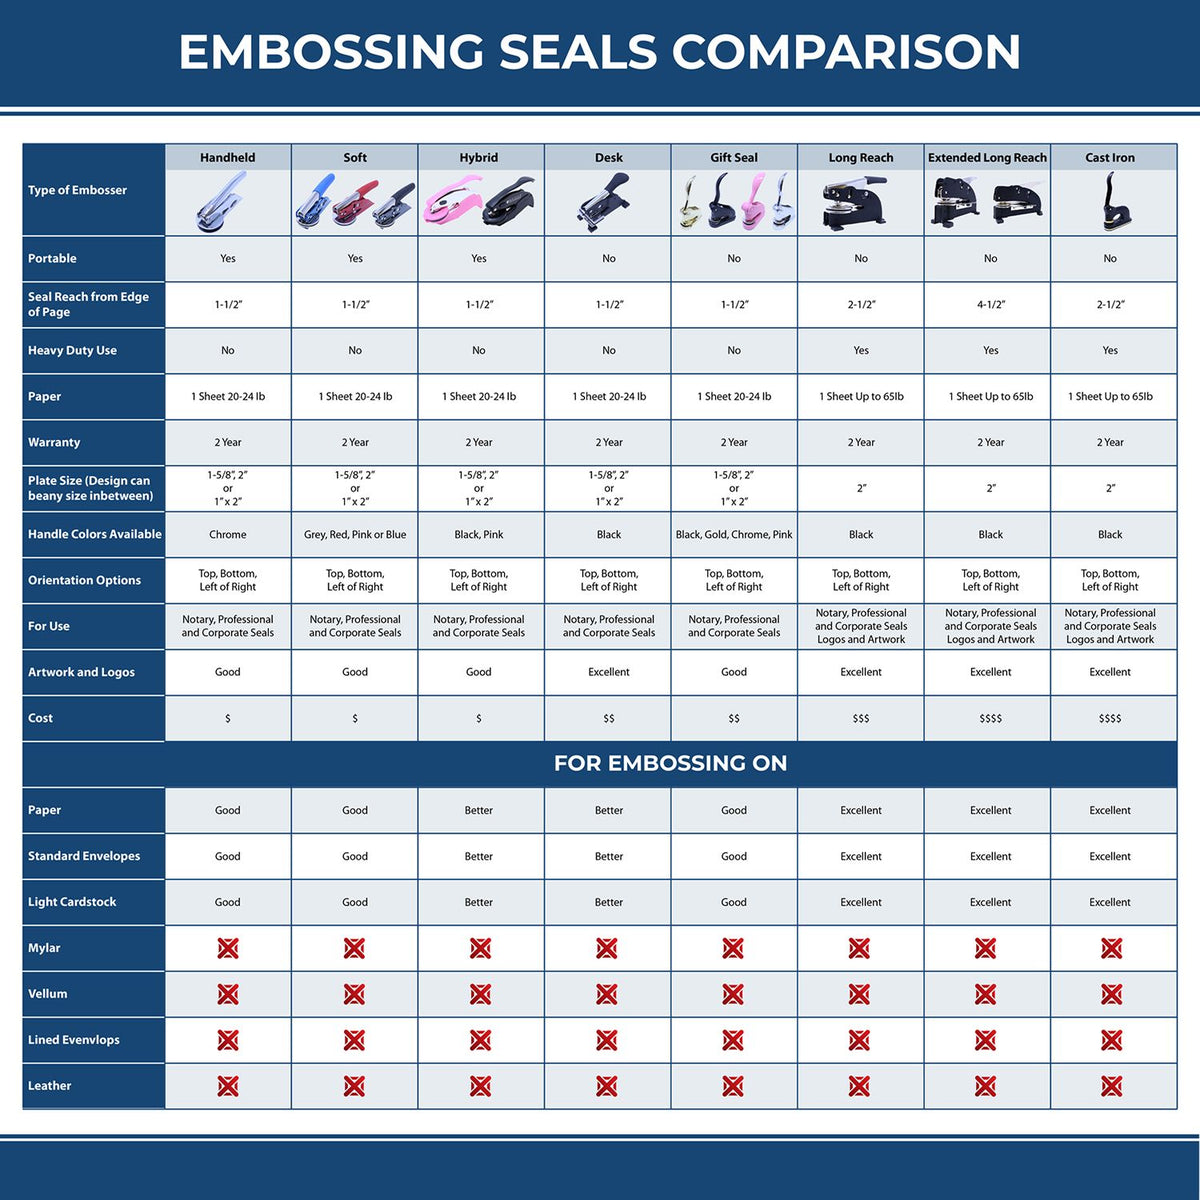 A comparison chart for the different types of mount models available for the Hybrid Rhode Island Land Surveyor Seal